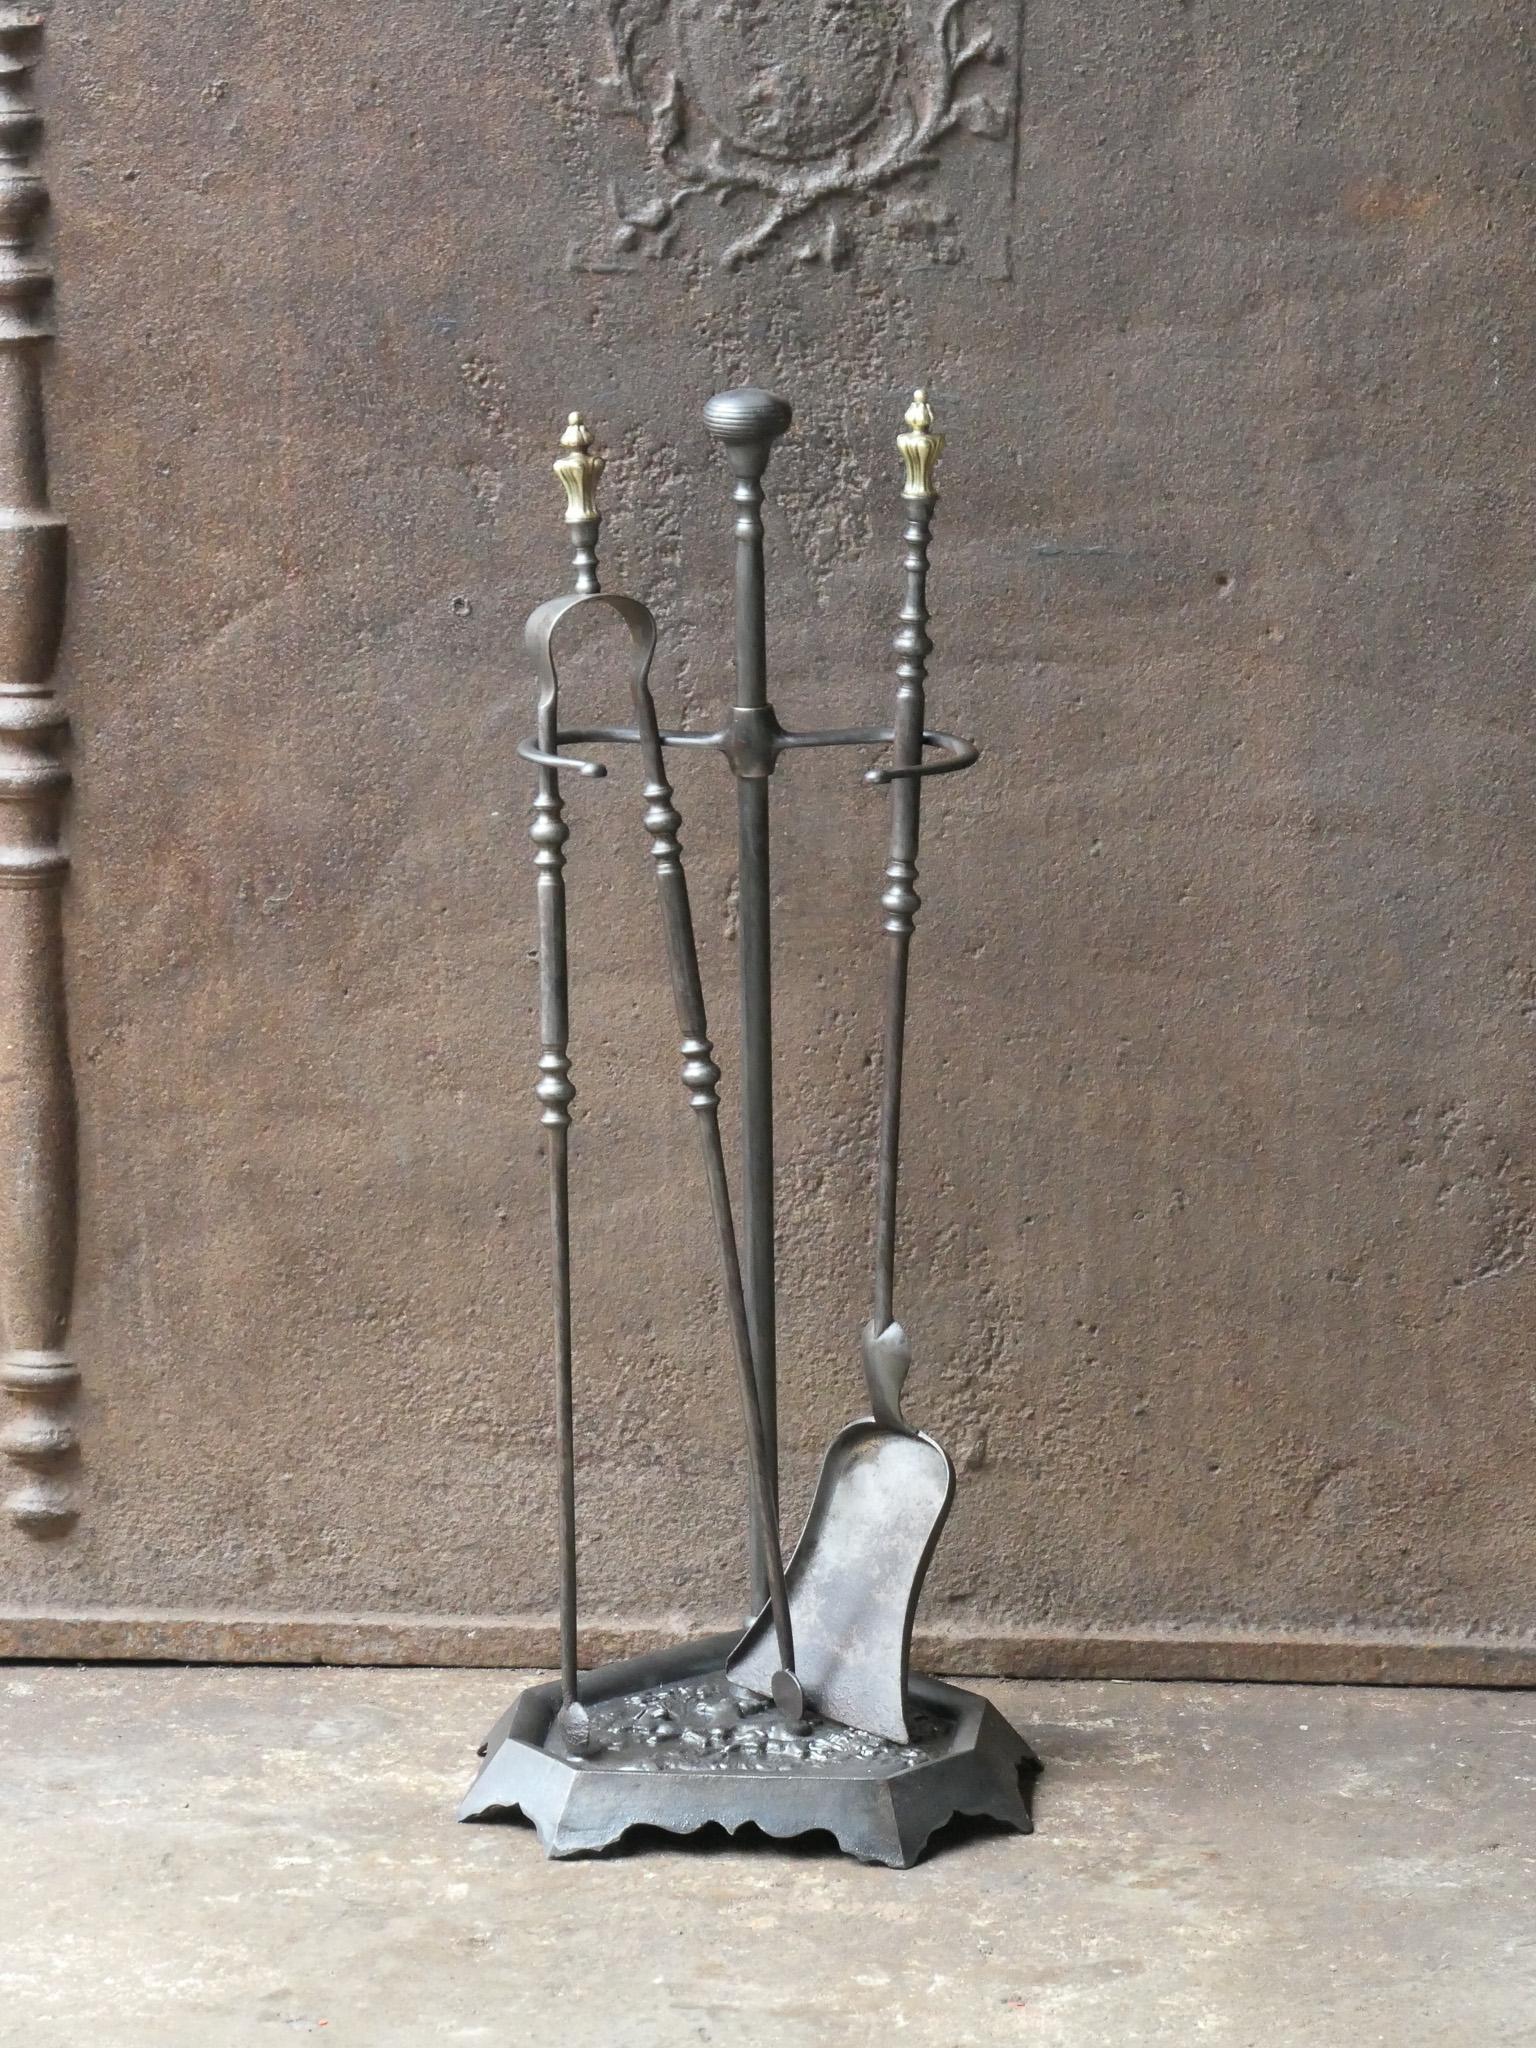 19th-century French Napoleon III period fireplace set. The tool set consists of thongs, a shovel and a stand. It is made of wrought iron and cast iron with brass details. The set is signed by 'Grandy Fils'. The condition is good.







